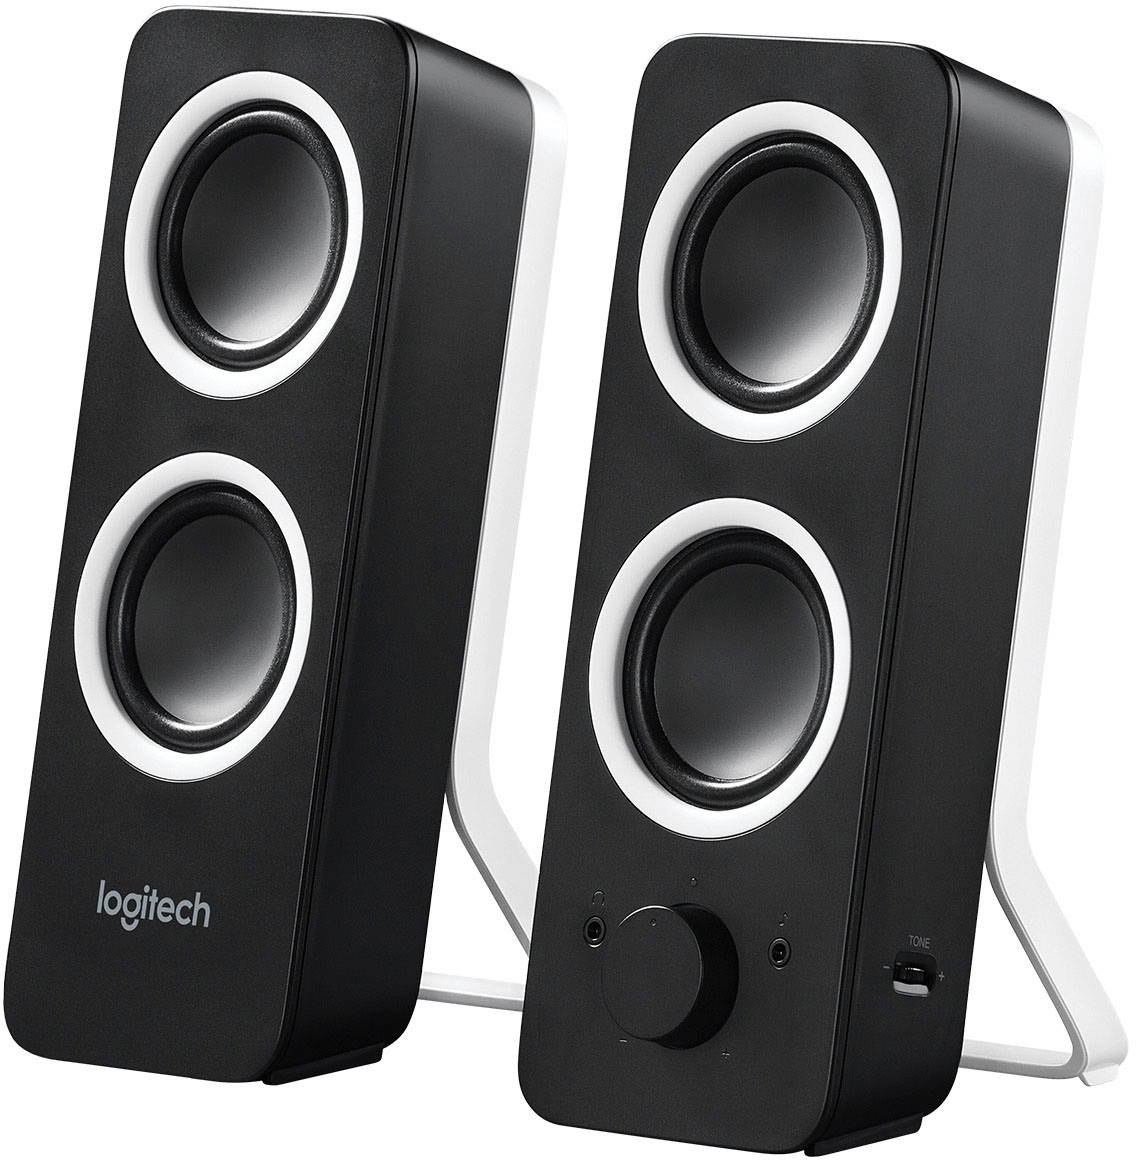 Z200 Multimedia Speakers with Stereo Sound (2-Piece) Black 980-000800 - Best